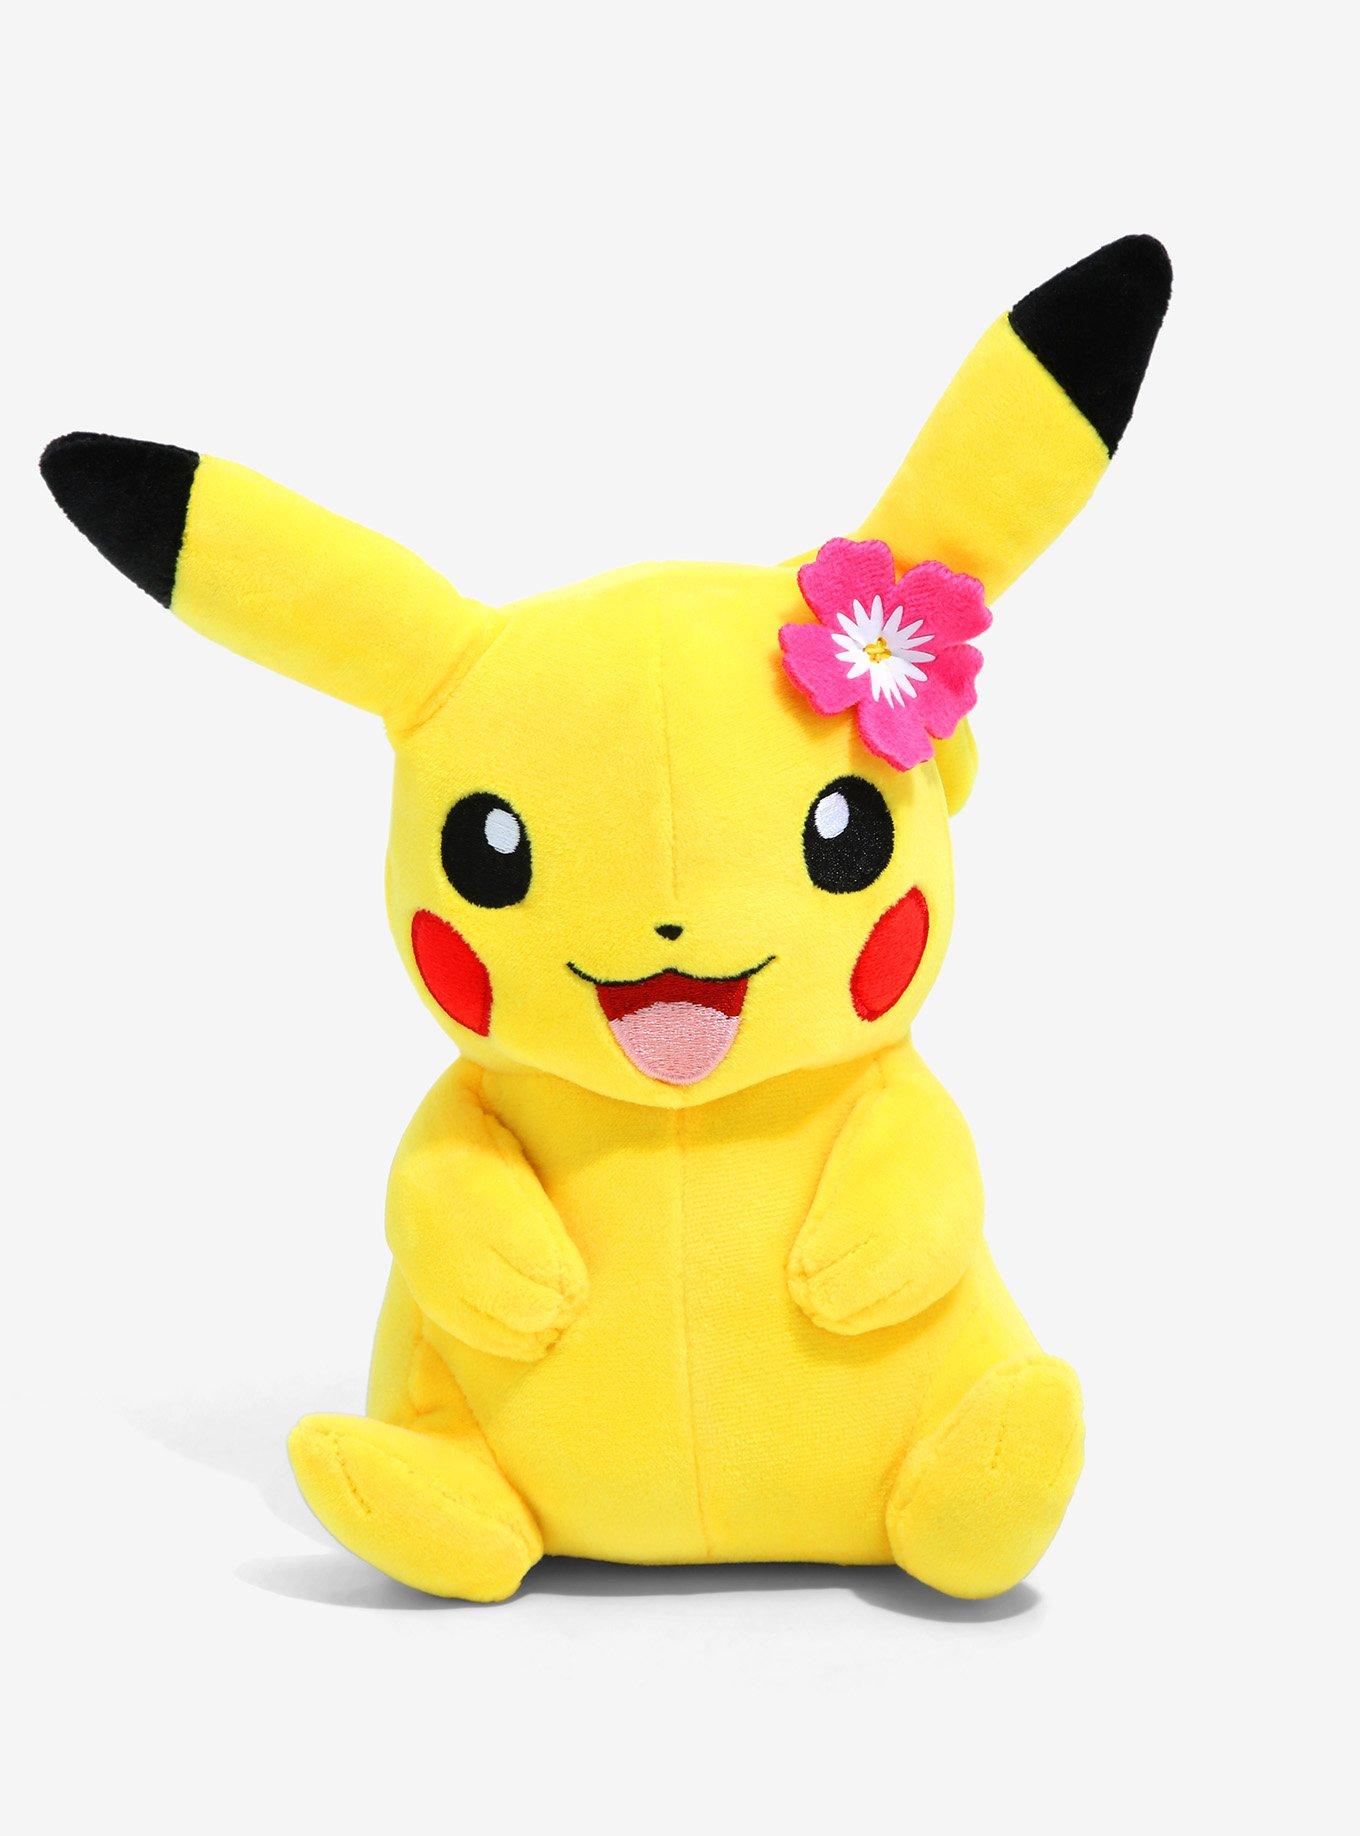 This Pikachu plush came vacuum sealed and it's the stuff of nightmares